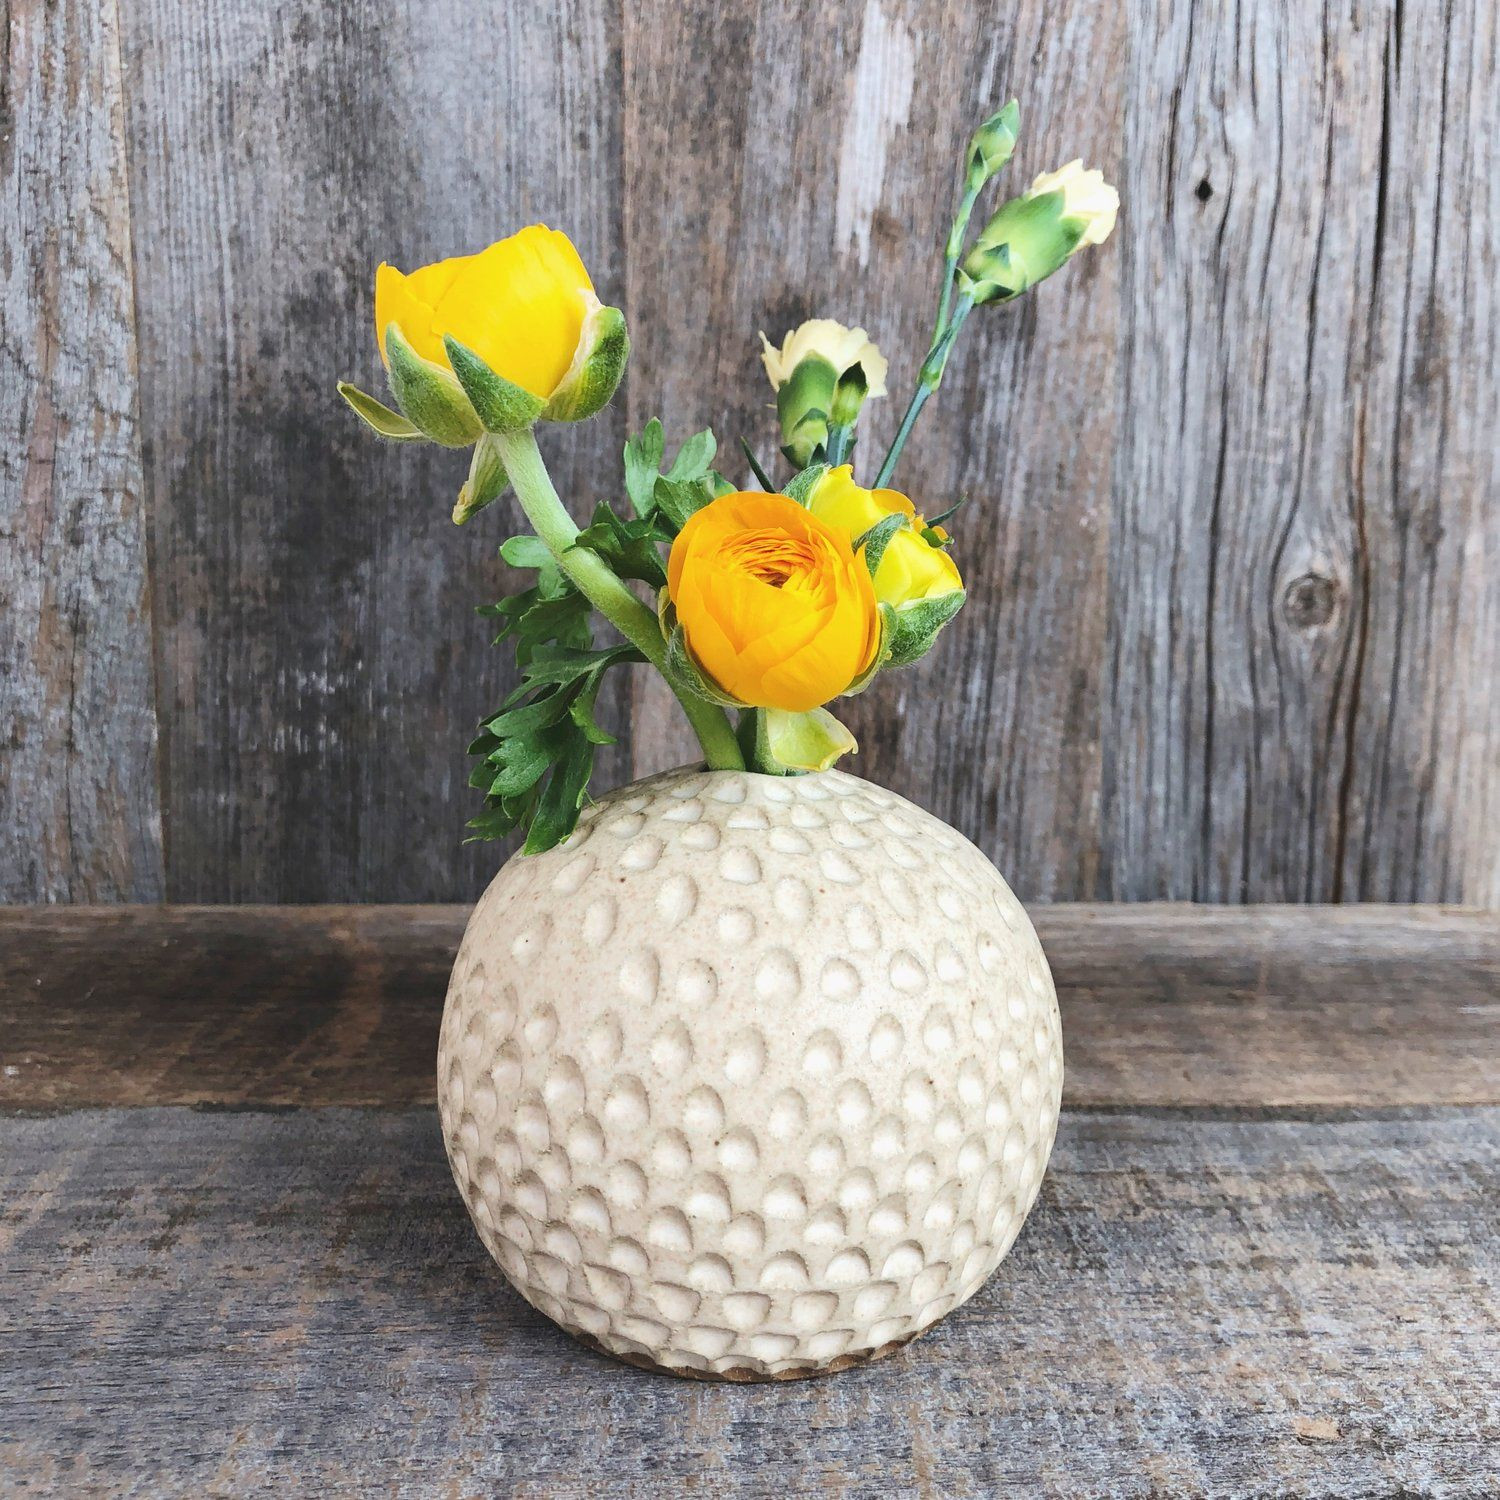 16 attractive Small Yellow Bud Vases 2024 free download small yellow bud vases of spring has sprung are you ready for easter and then mothers day a inside spring has sprung are you ready for easter and then mothers day a handmade